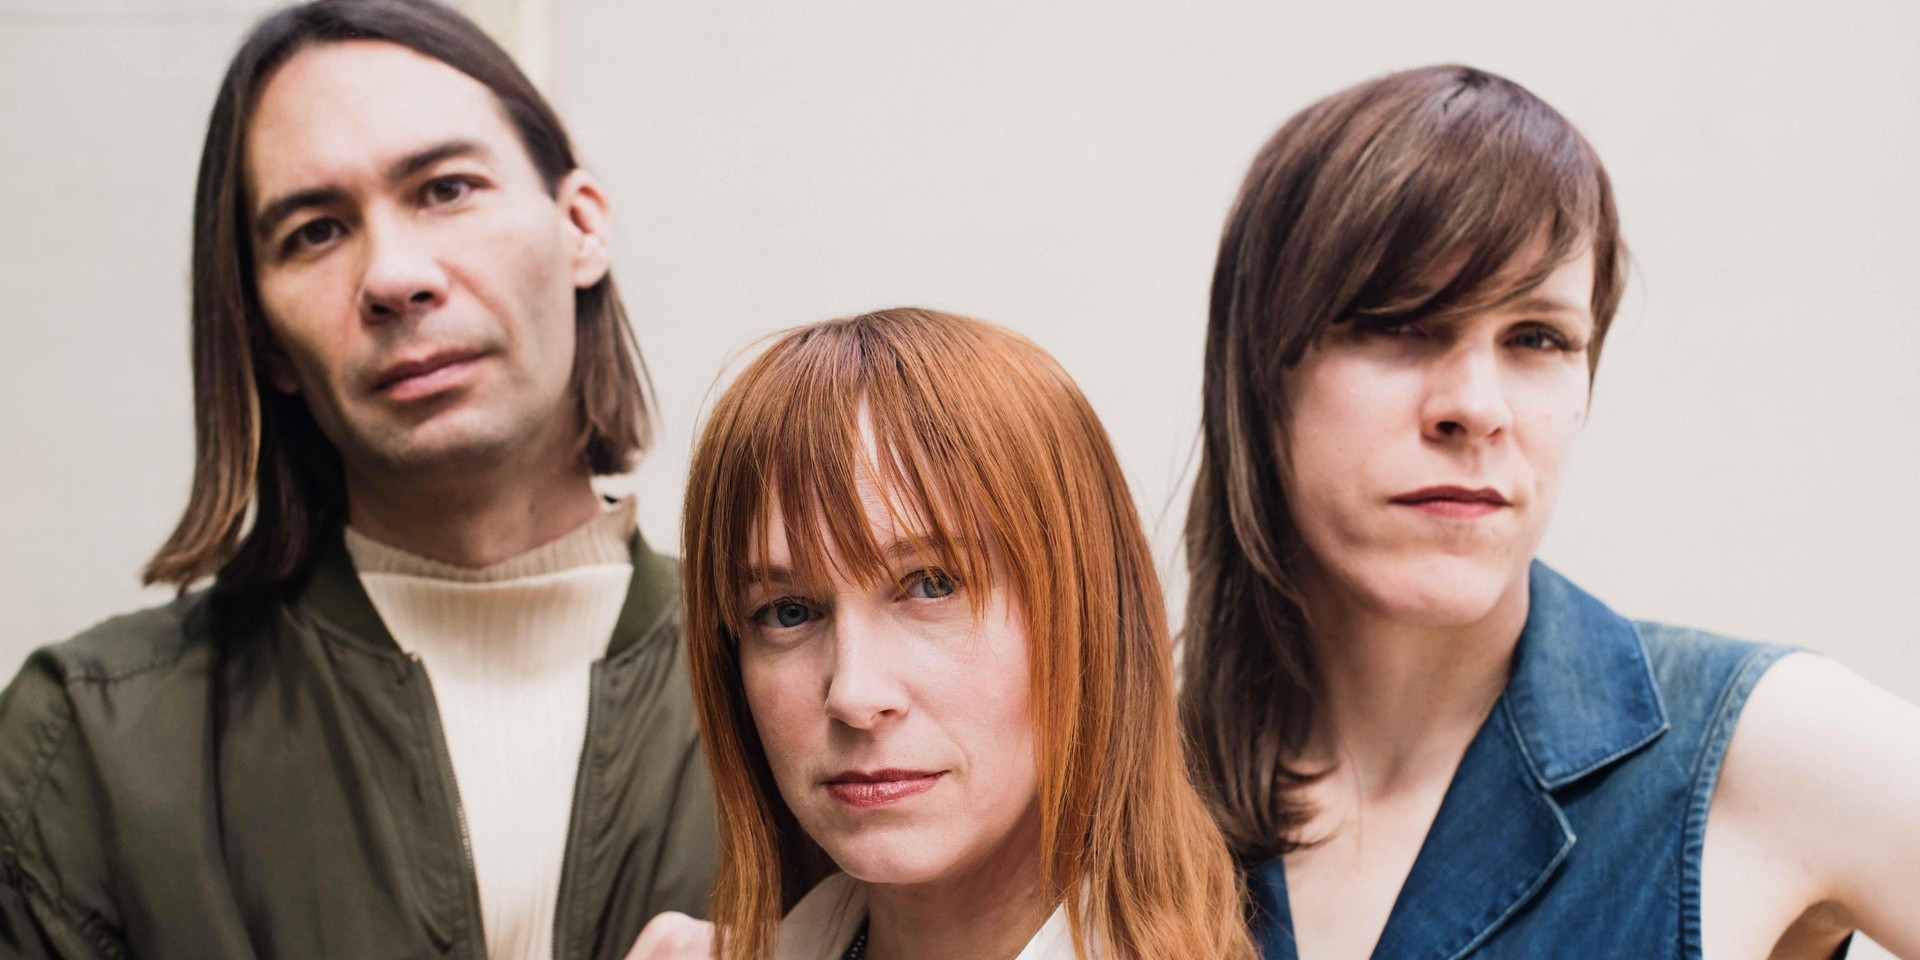 Rainer Maria's show in Singapore tomorrow cancelled